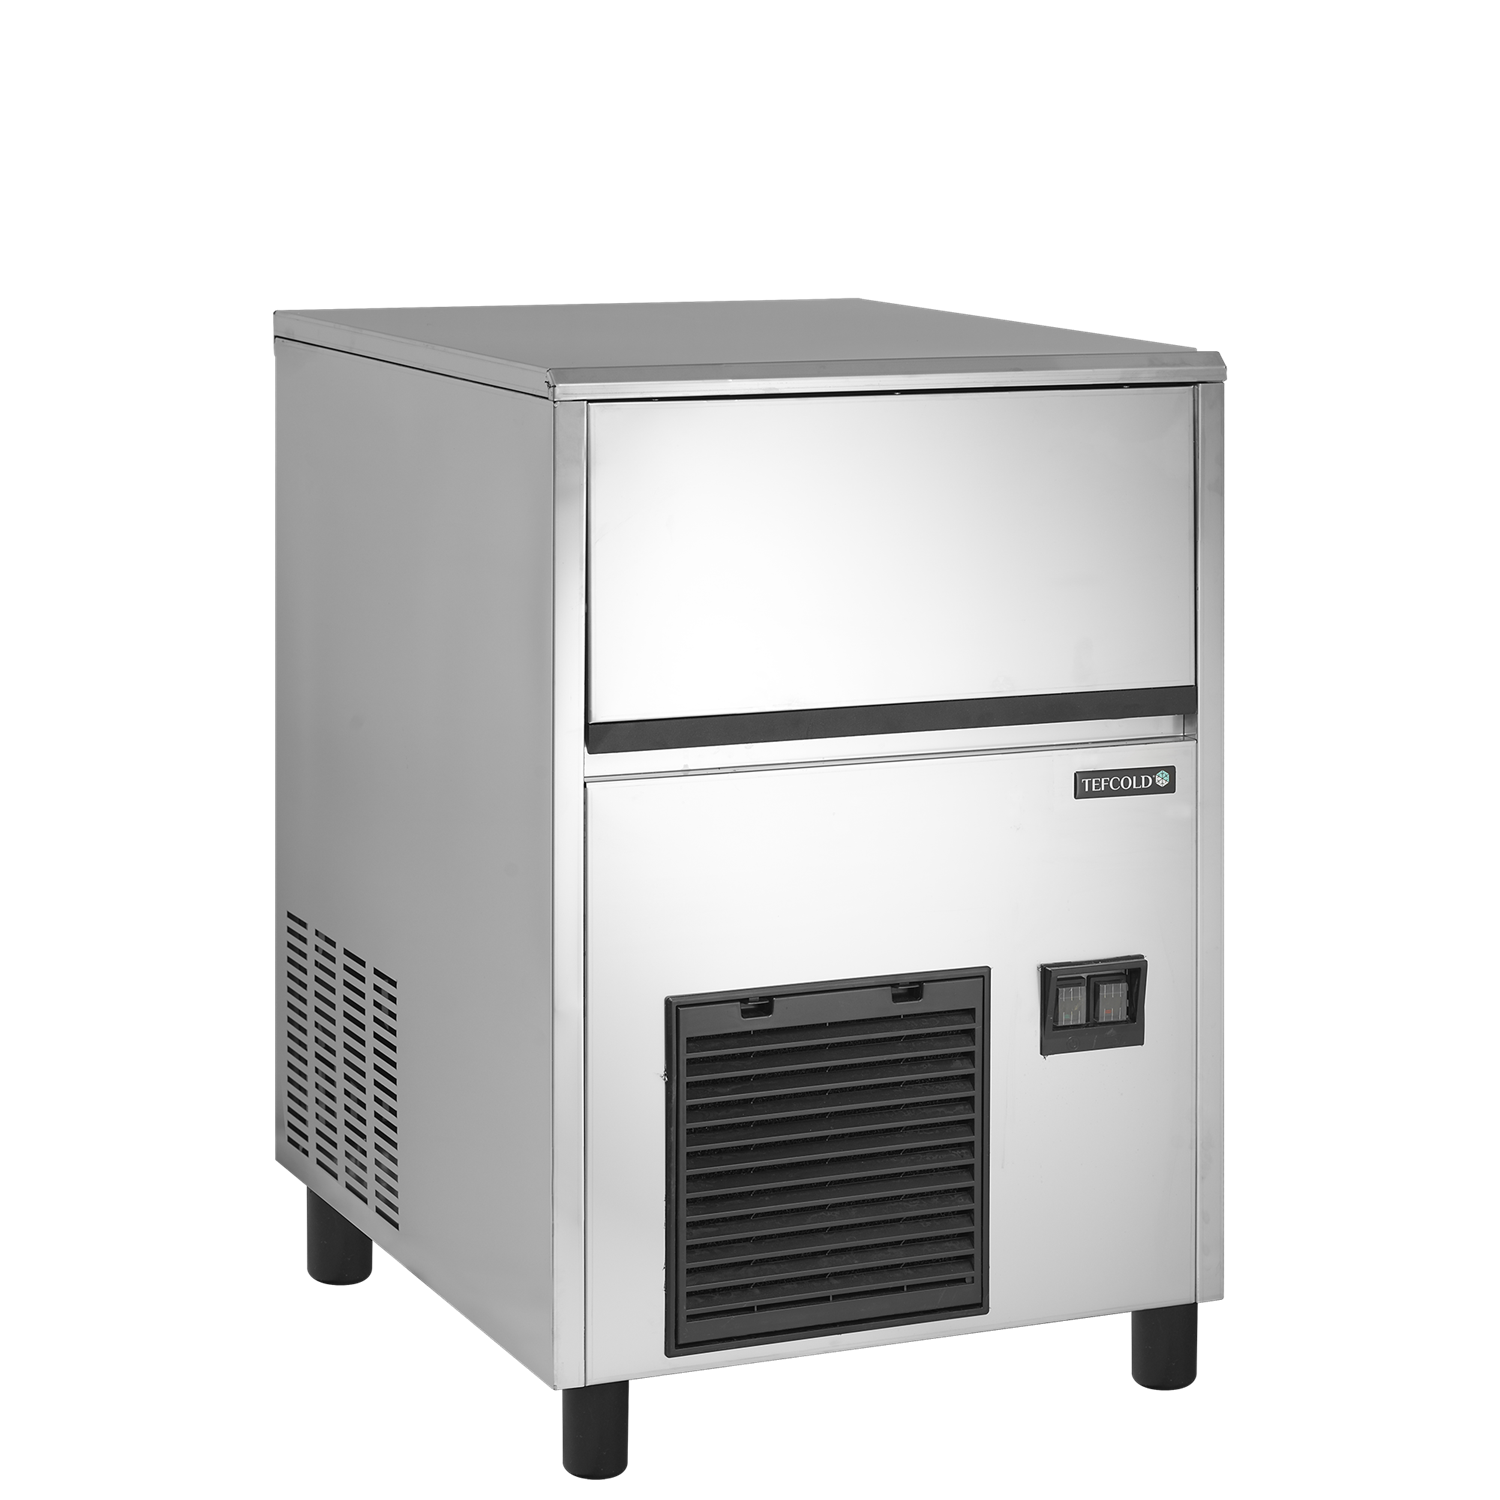 Tefcold TC-57KG Ice Maker.Product Ref:00628.MODEL:TC57.🚚 3-5 Days Delivery